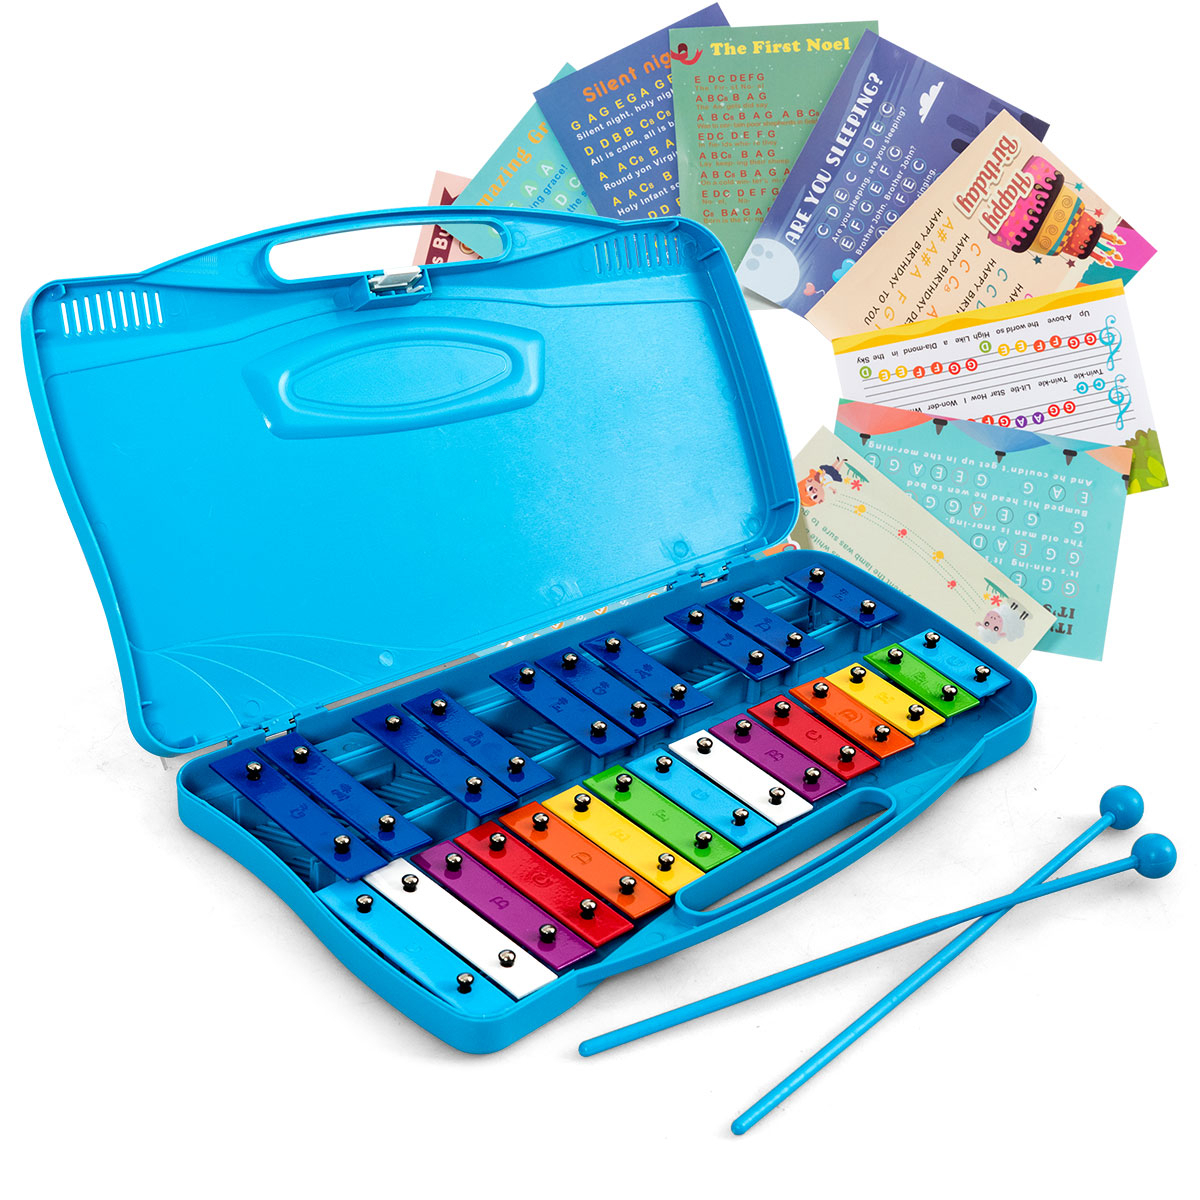 25 Notes Kids Glockenspiel Chromatic Metal Xylophone W/ Blue Case And 2 Mallets